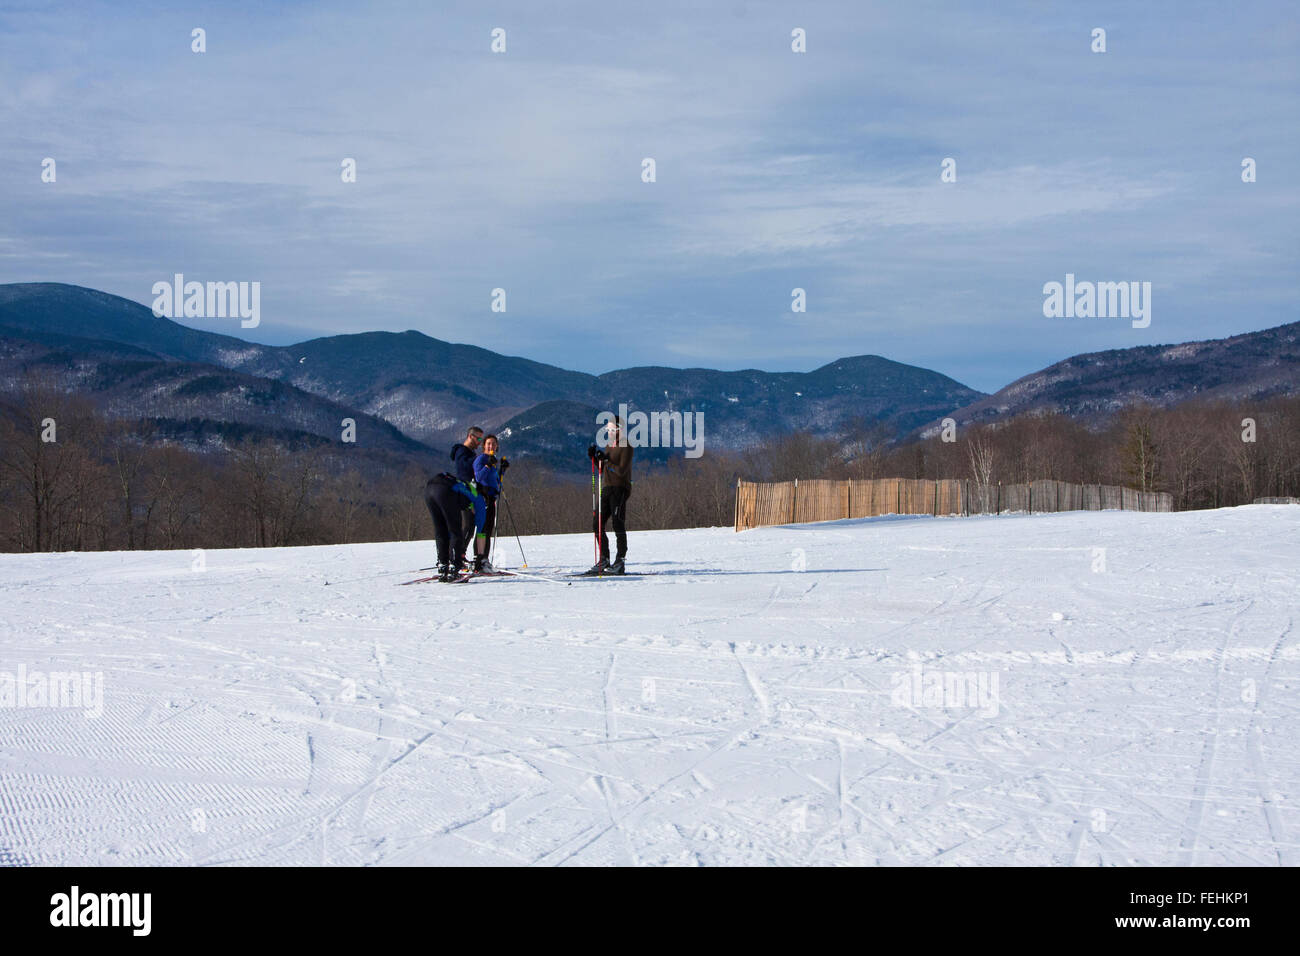 The Von Trapp Family Lodge in Stowe Vermont, USA, a group of friends take a break while cross country skiing. Stock Photo